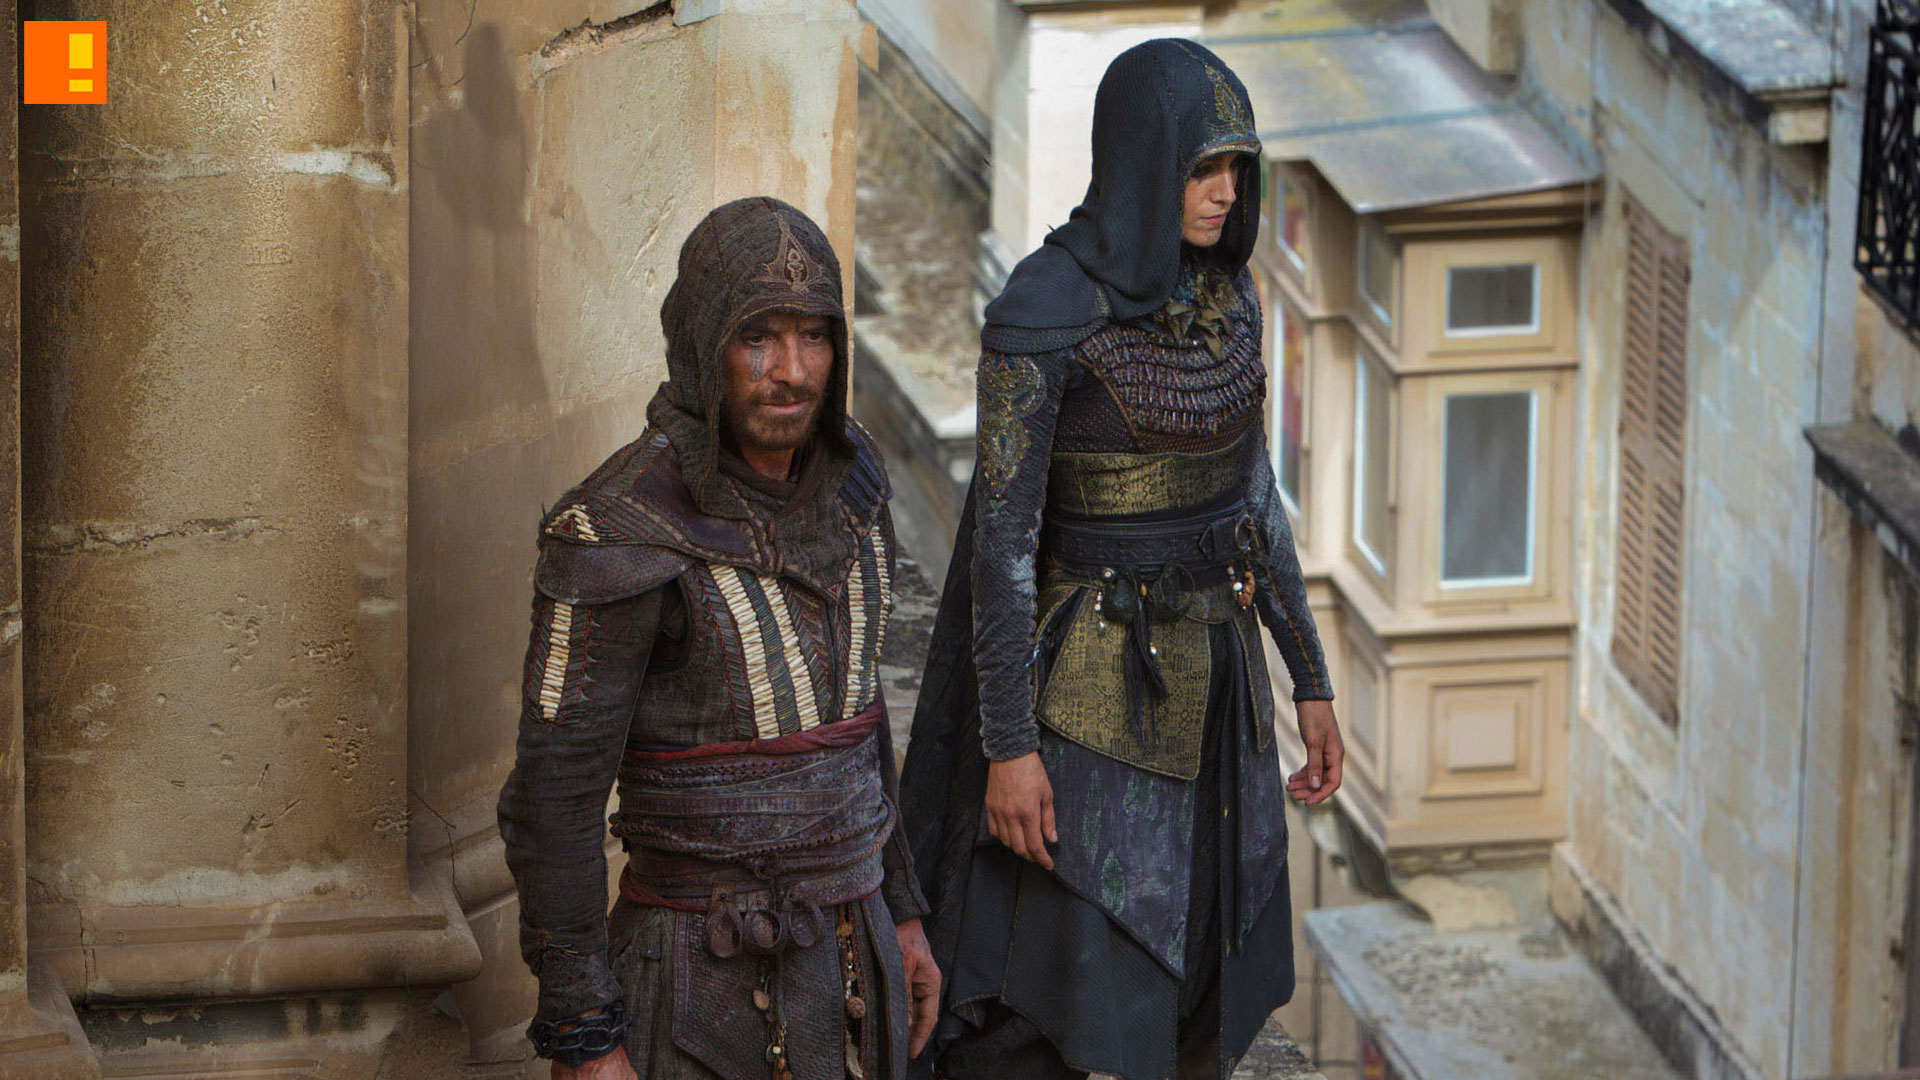 assassins creed, callum lynch,michael fassbender, ac, ubisoft, preview, images,stills,exclusive, the action pixel, entertainment on tap,video game movie, stills,